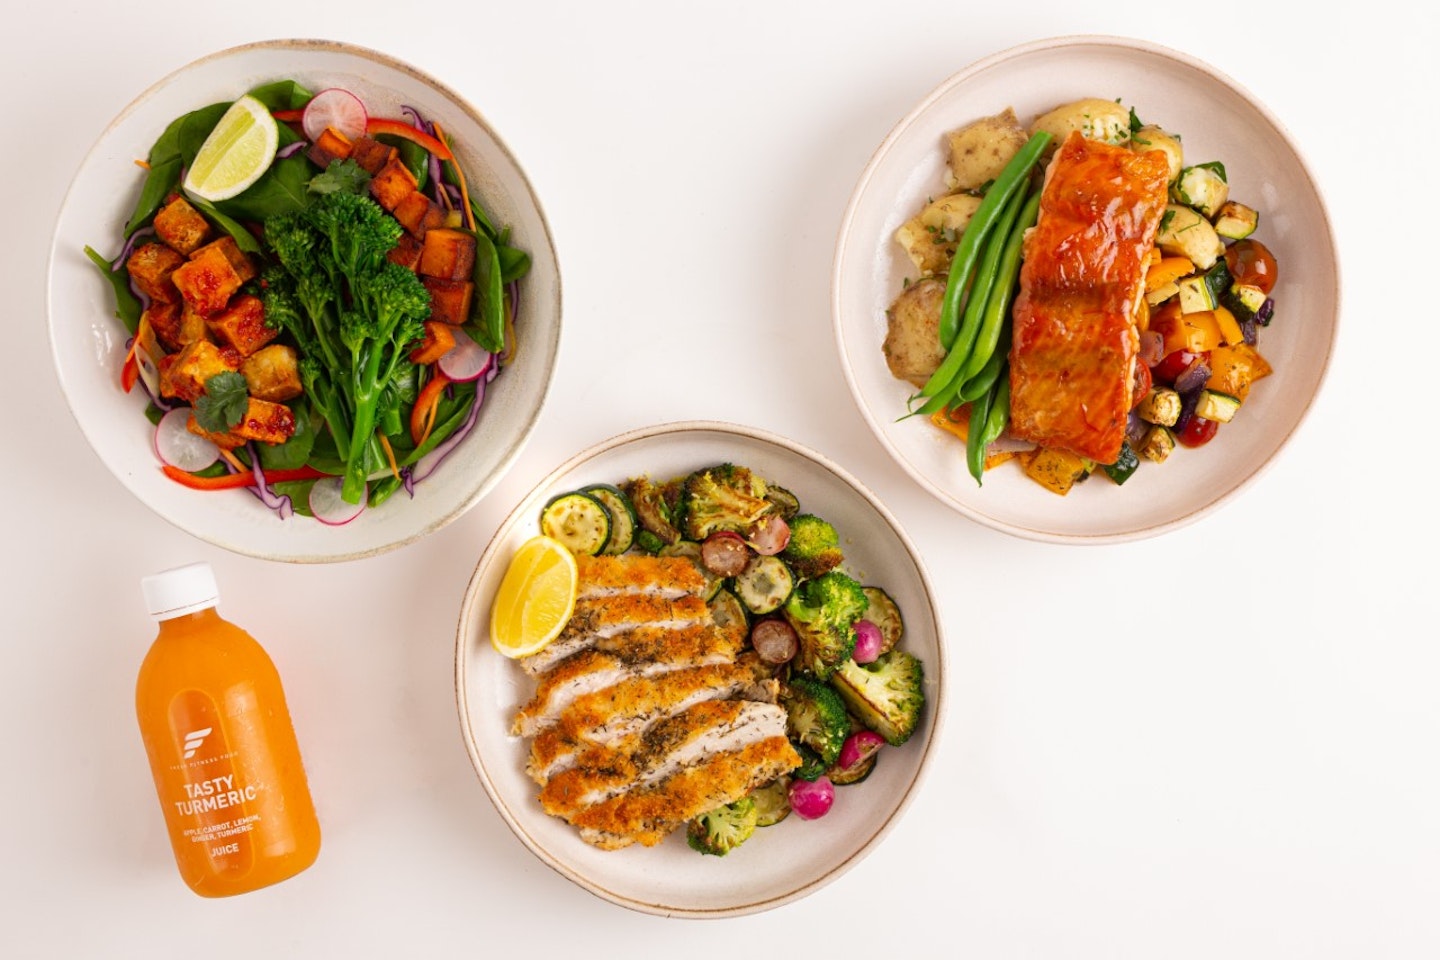 The Best Healthy Meal Kits Delivered To Your Door